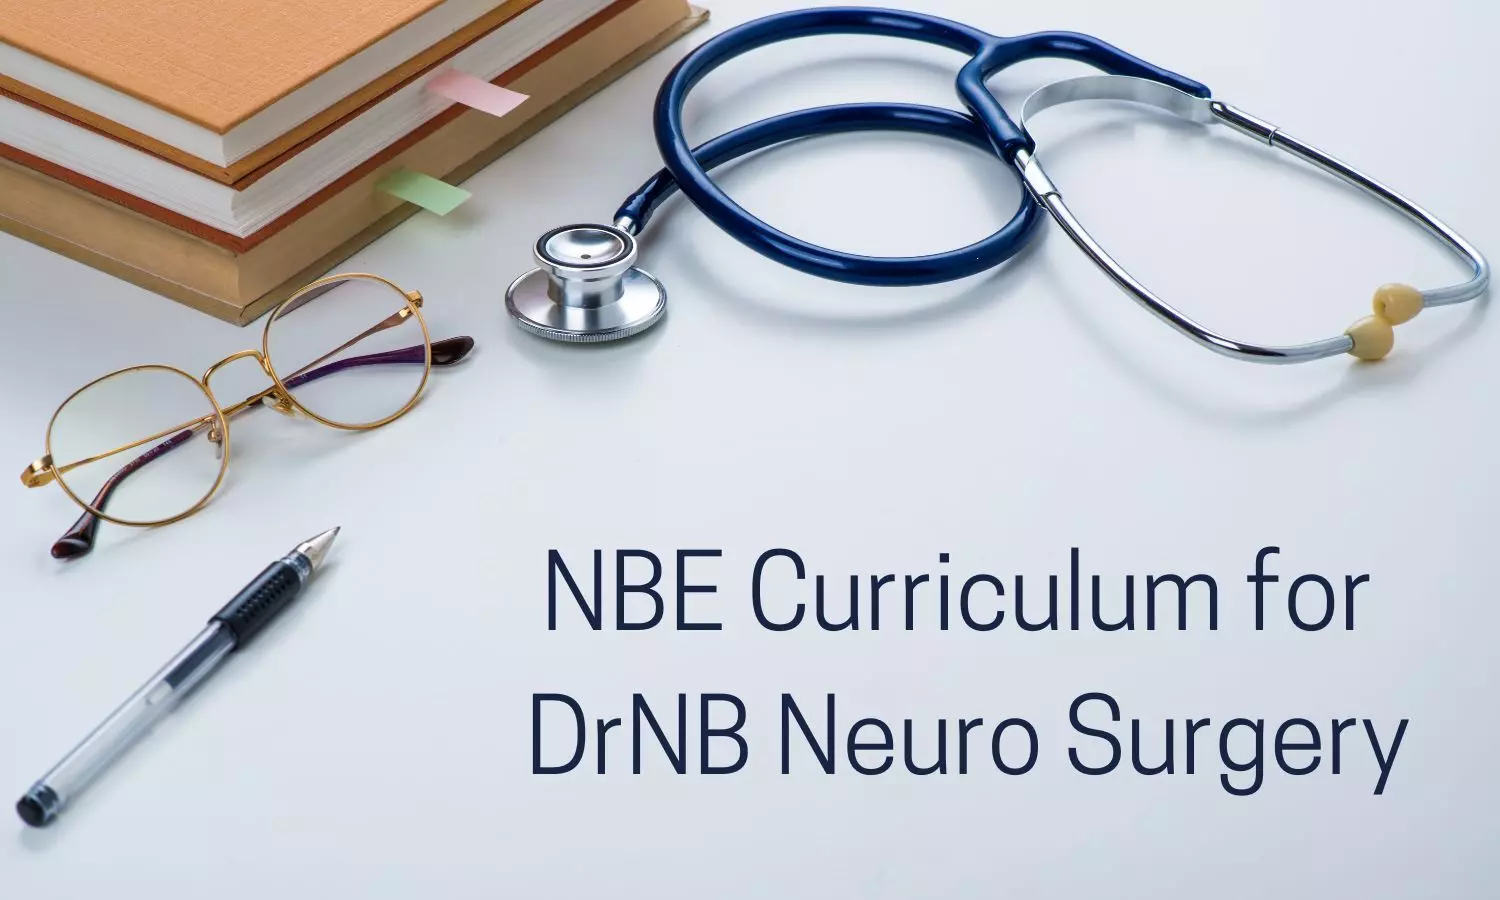 DrNB Neuro Surgery In India: Check Out NBE Released Curriculum